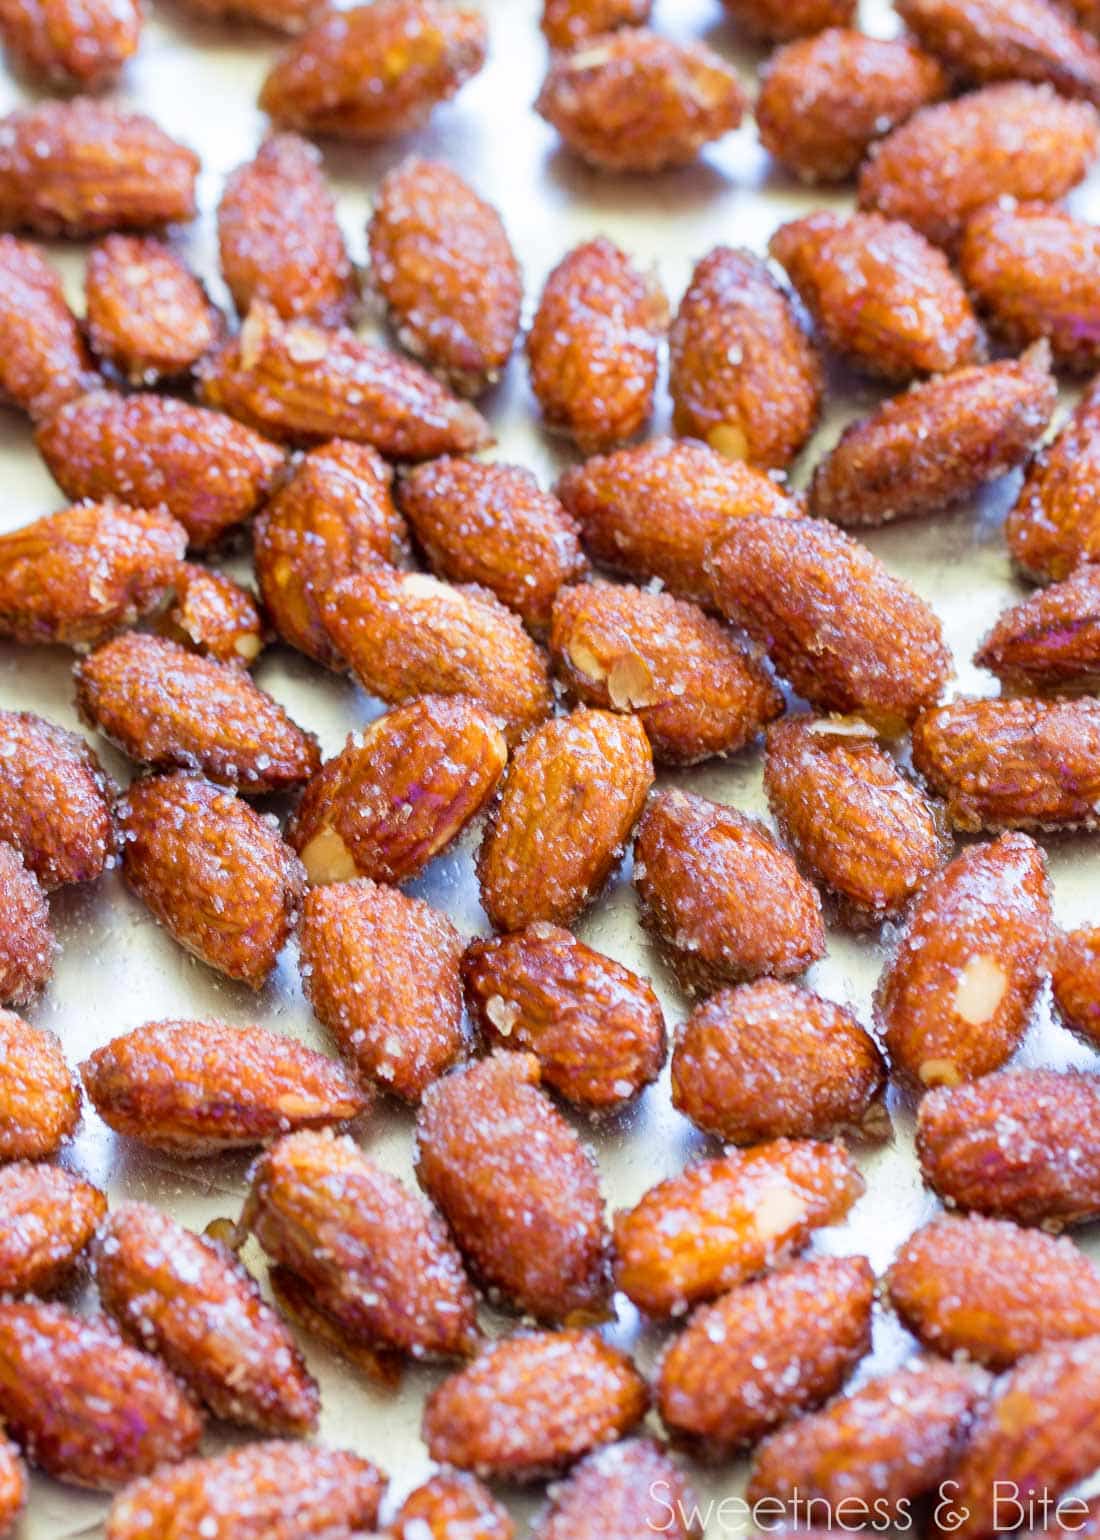 A tray of honey roasted almonds.